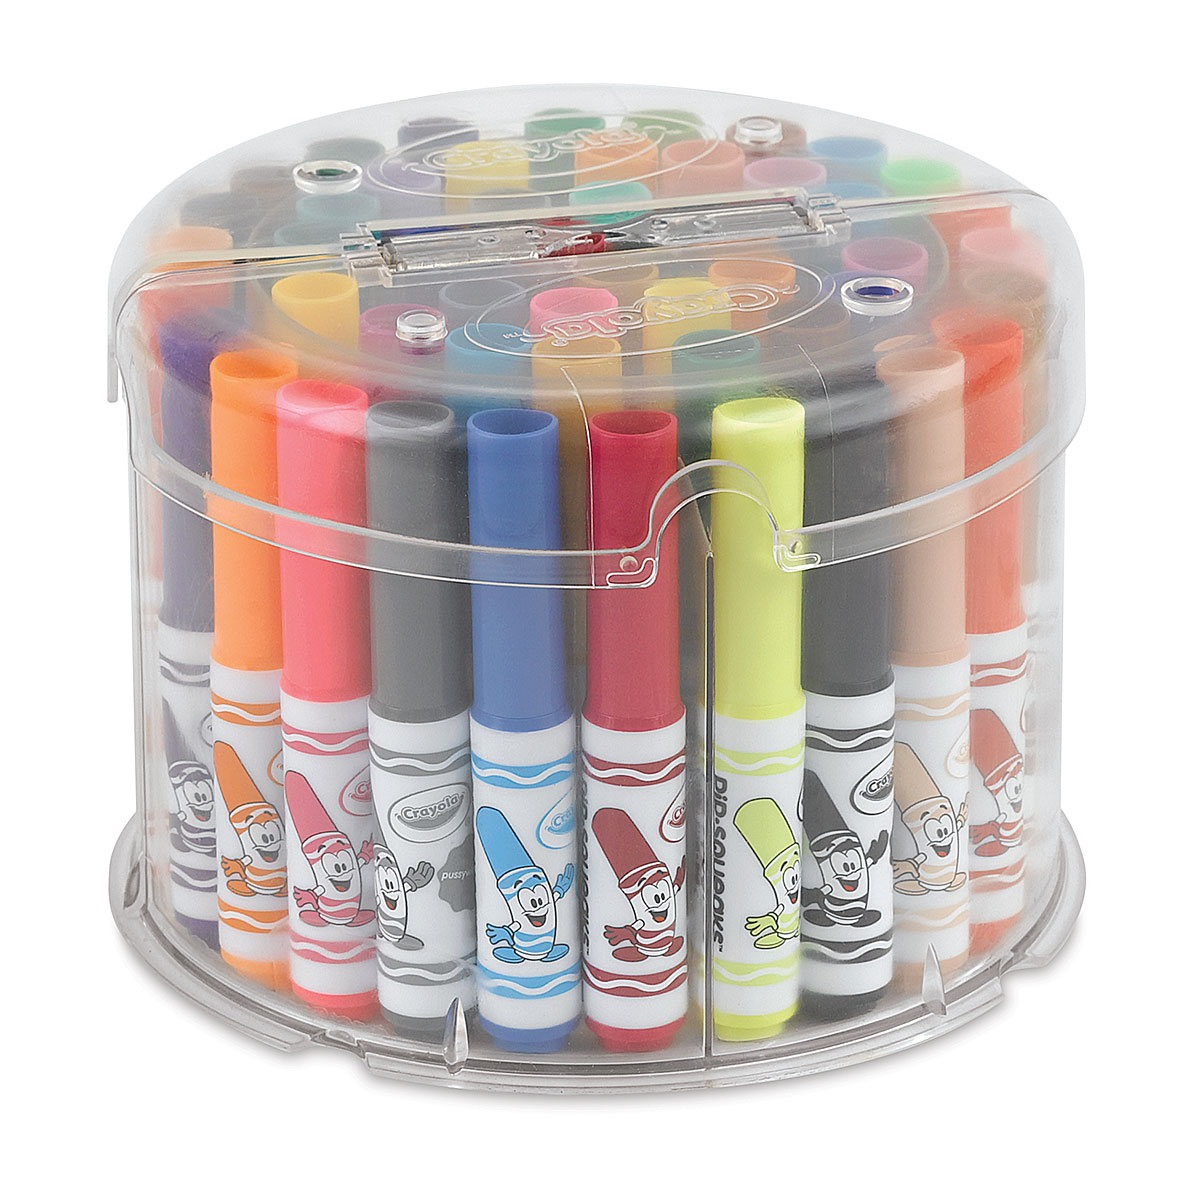 Crayola Pip Squeaks Marker Set, 50 Washable Markers, Gift for Kids